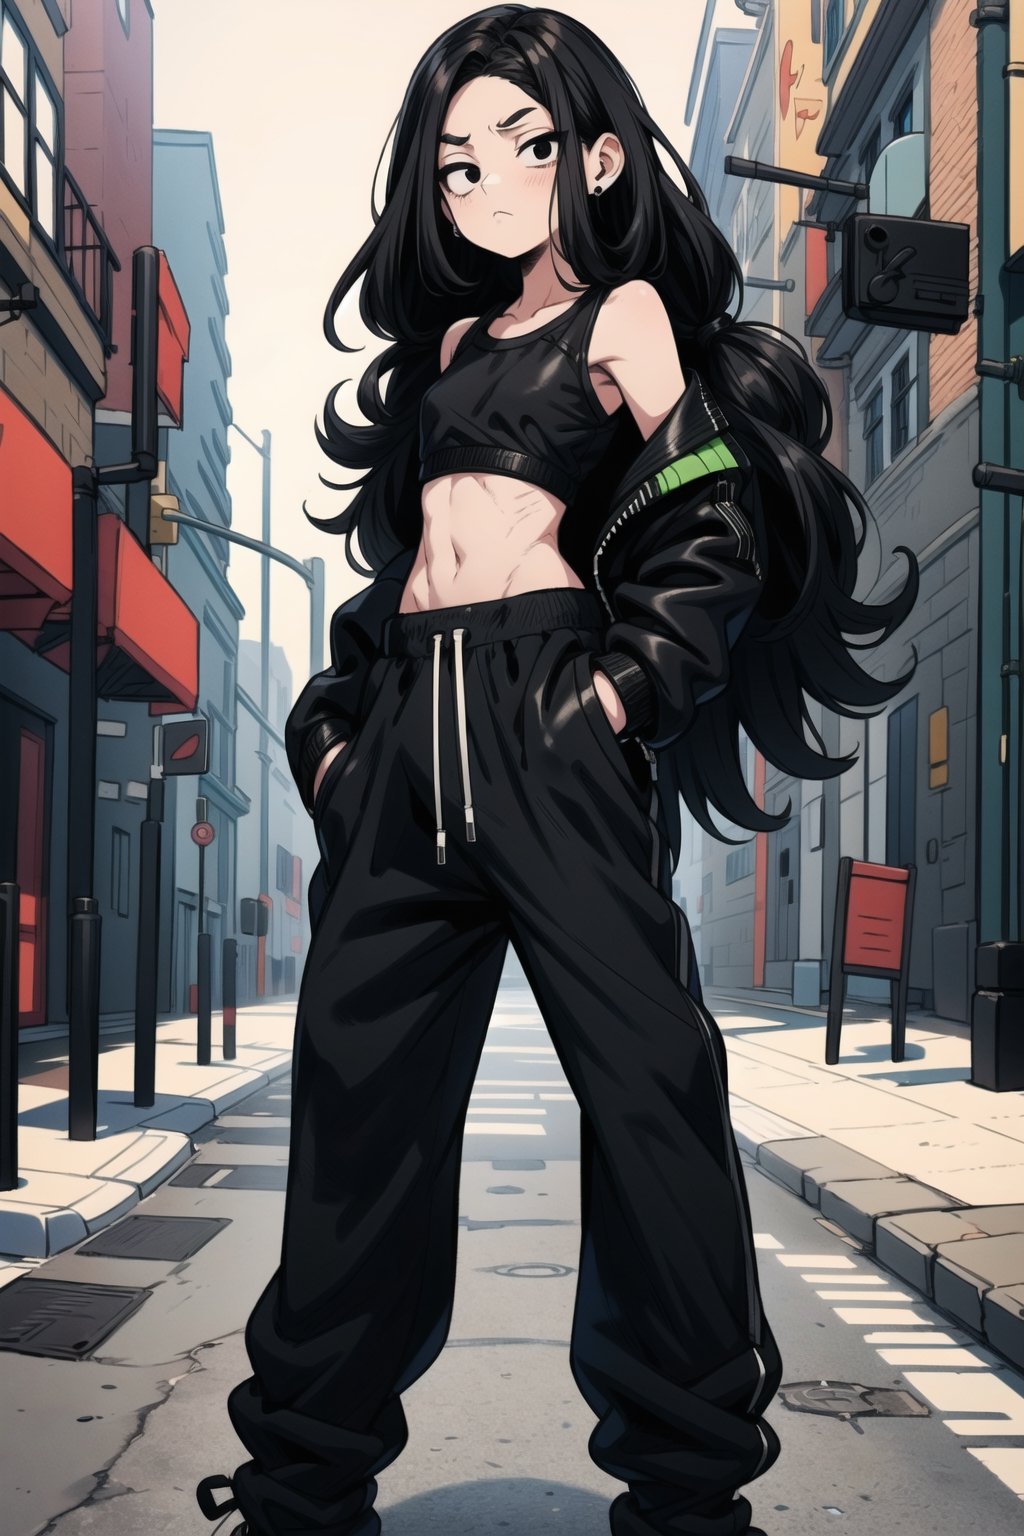 1 girl (25 years old), dark black hair (curly hair, long hair), (best quality), (black eyes), thin body, slim body, serious face, 
leather jacket, black top, black baggy joggers (wool joggers, baggy pants) , black leather high top boots ,
Standing in the street,niji